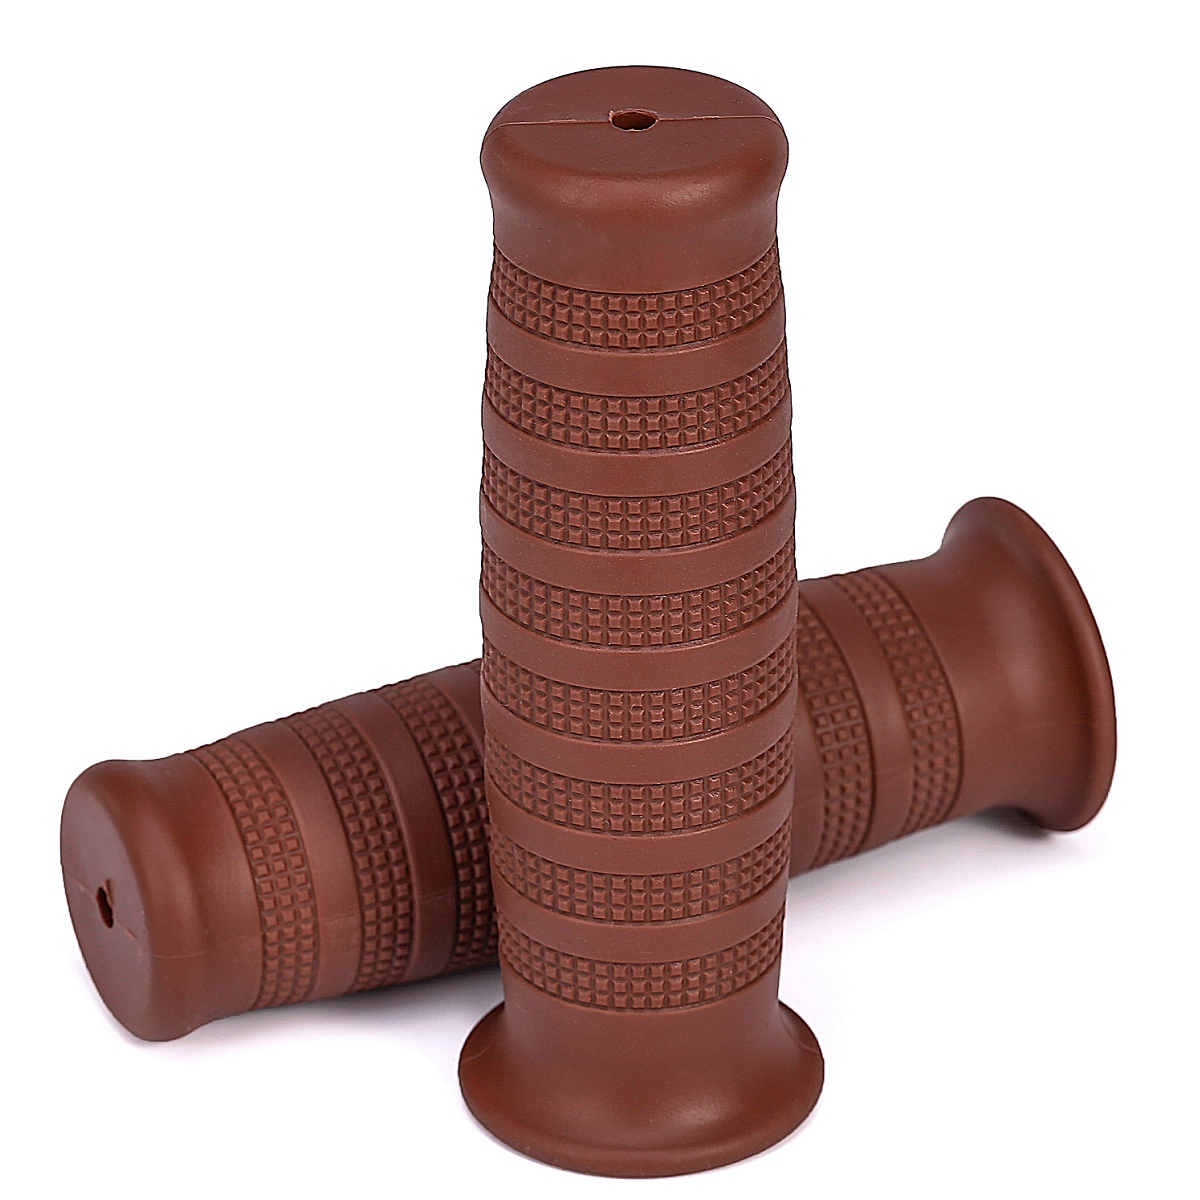 7/8″ (22 mm.) or 1″ (25 mm.) STRIPS grips.